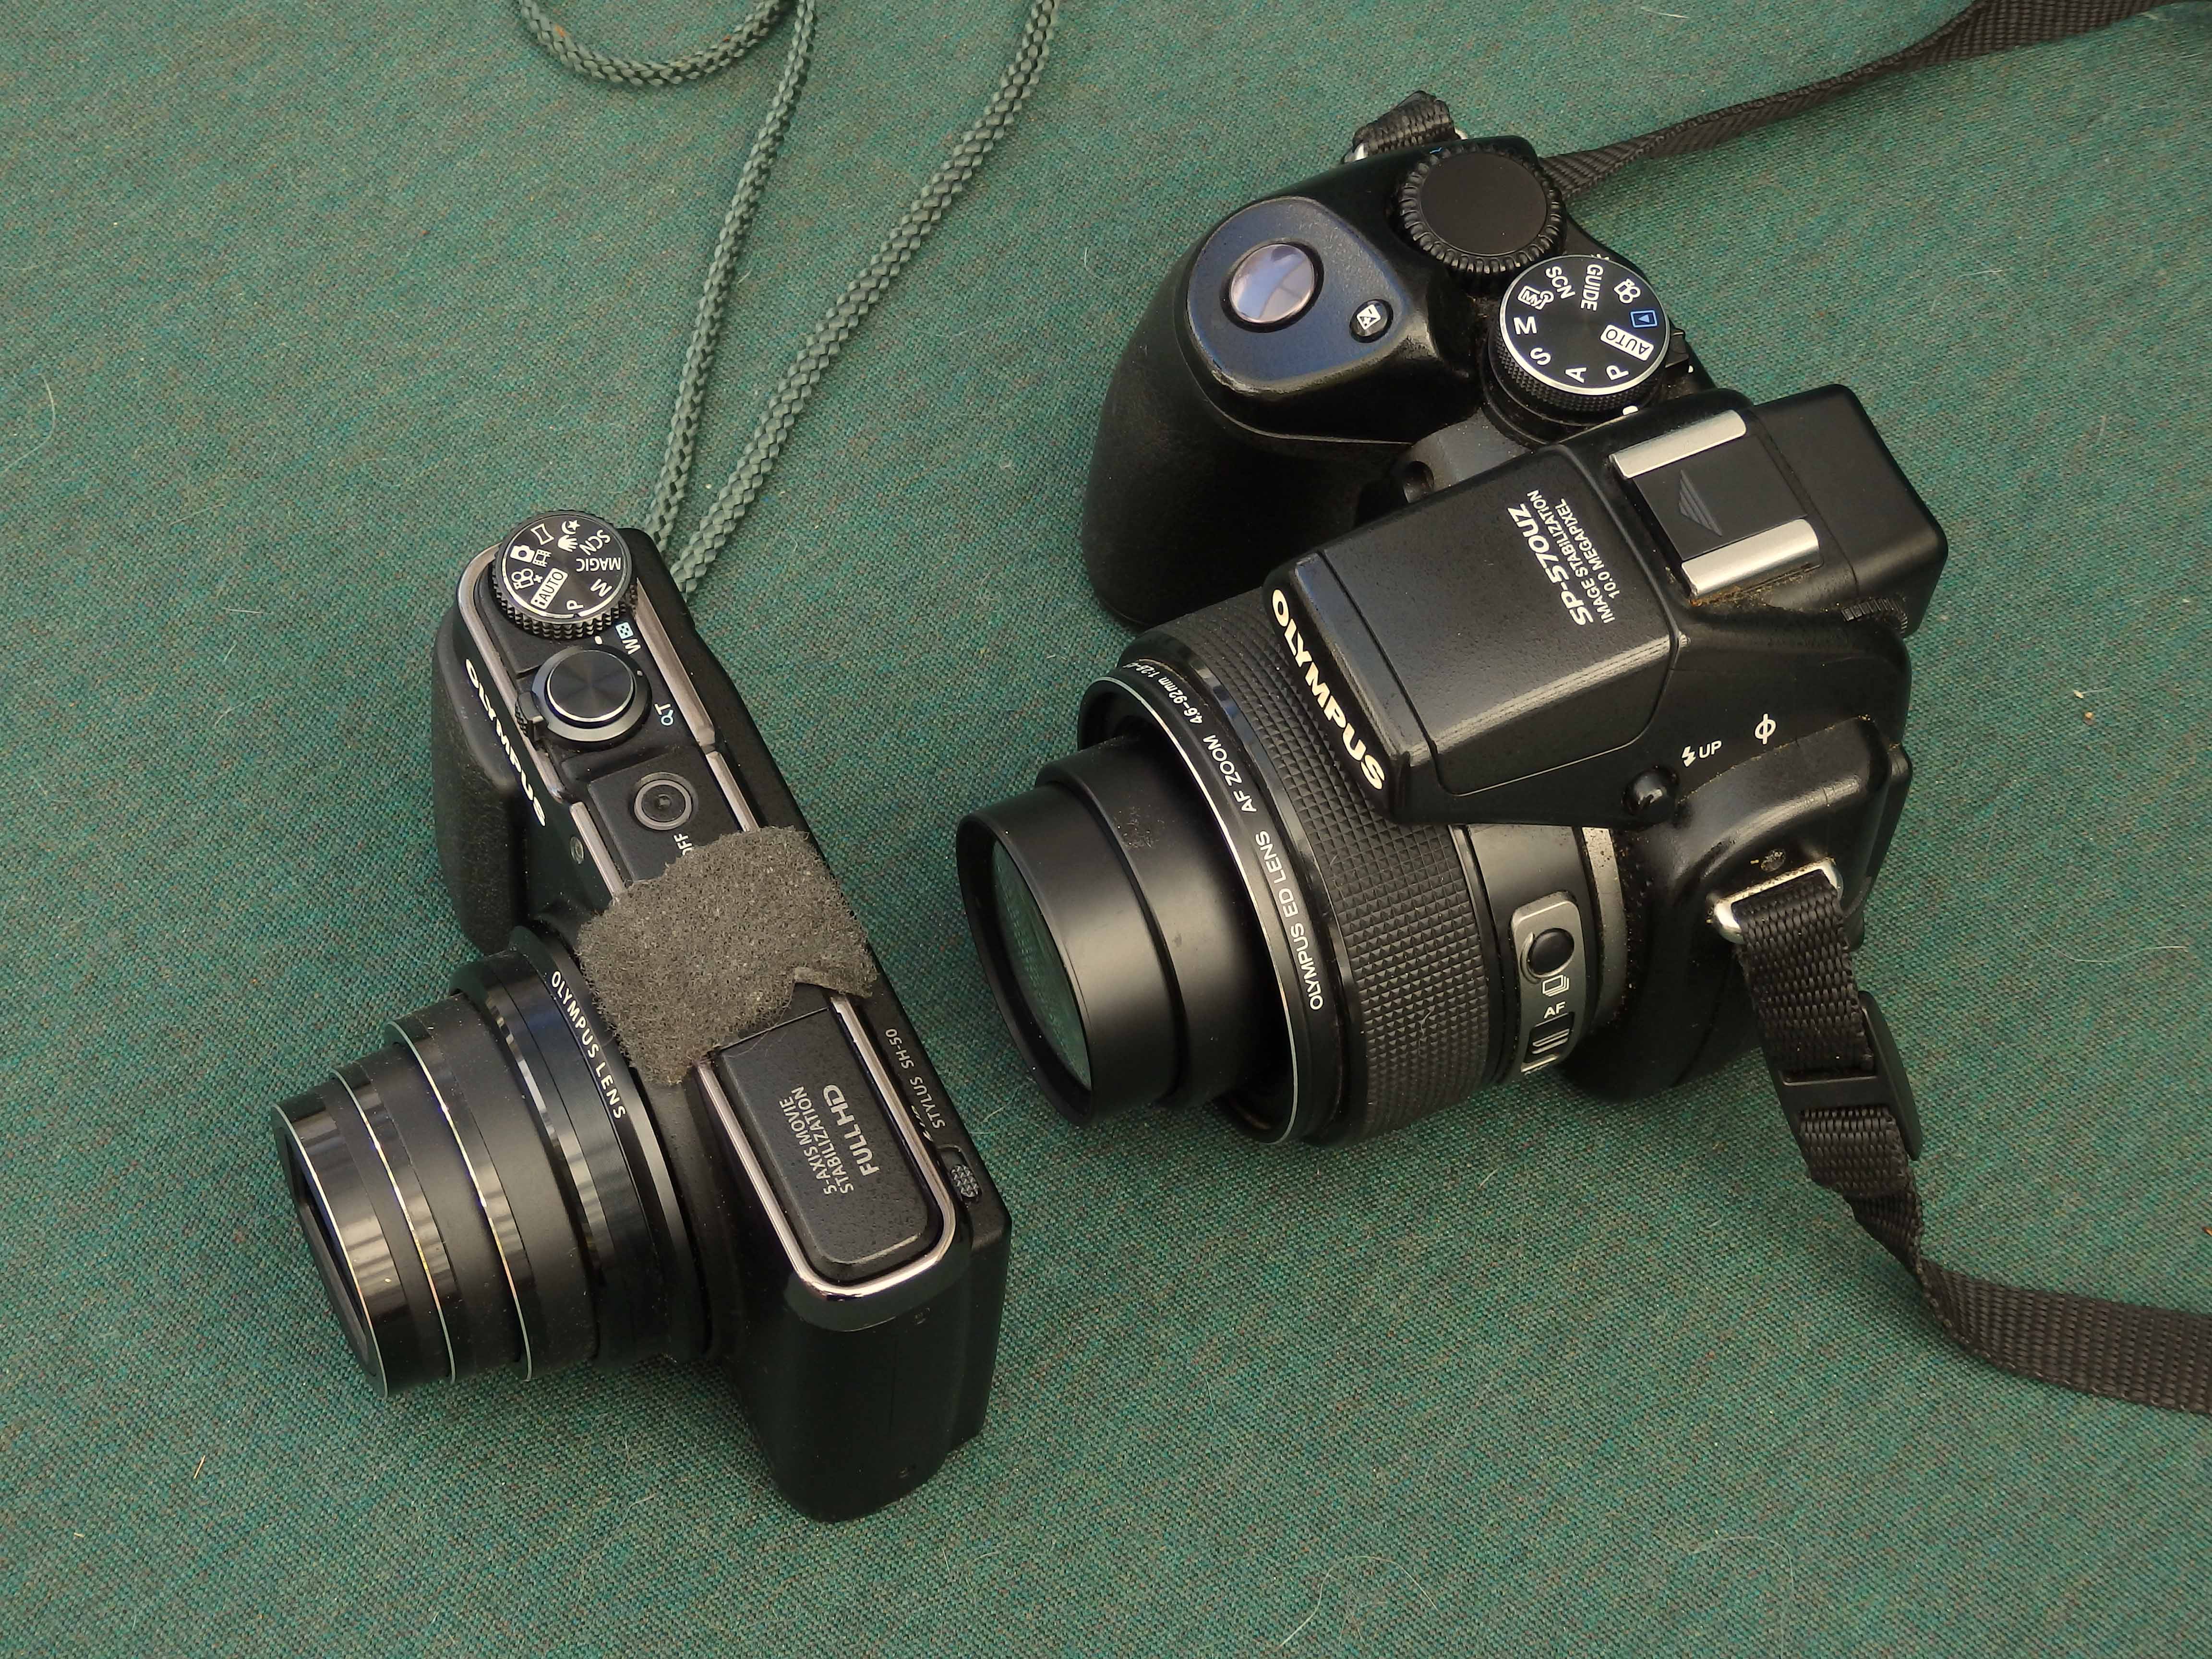 Two of my Cameras